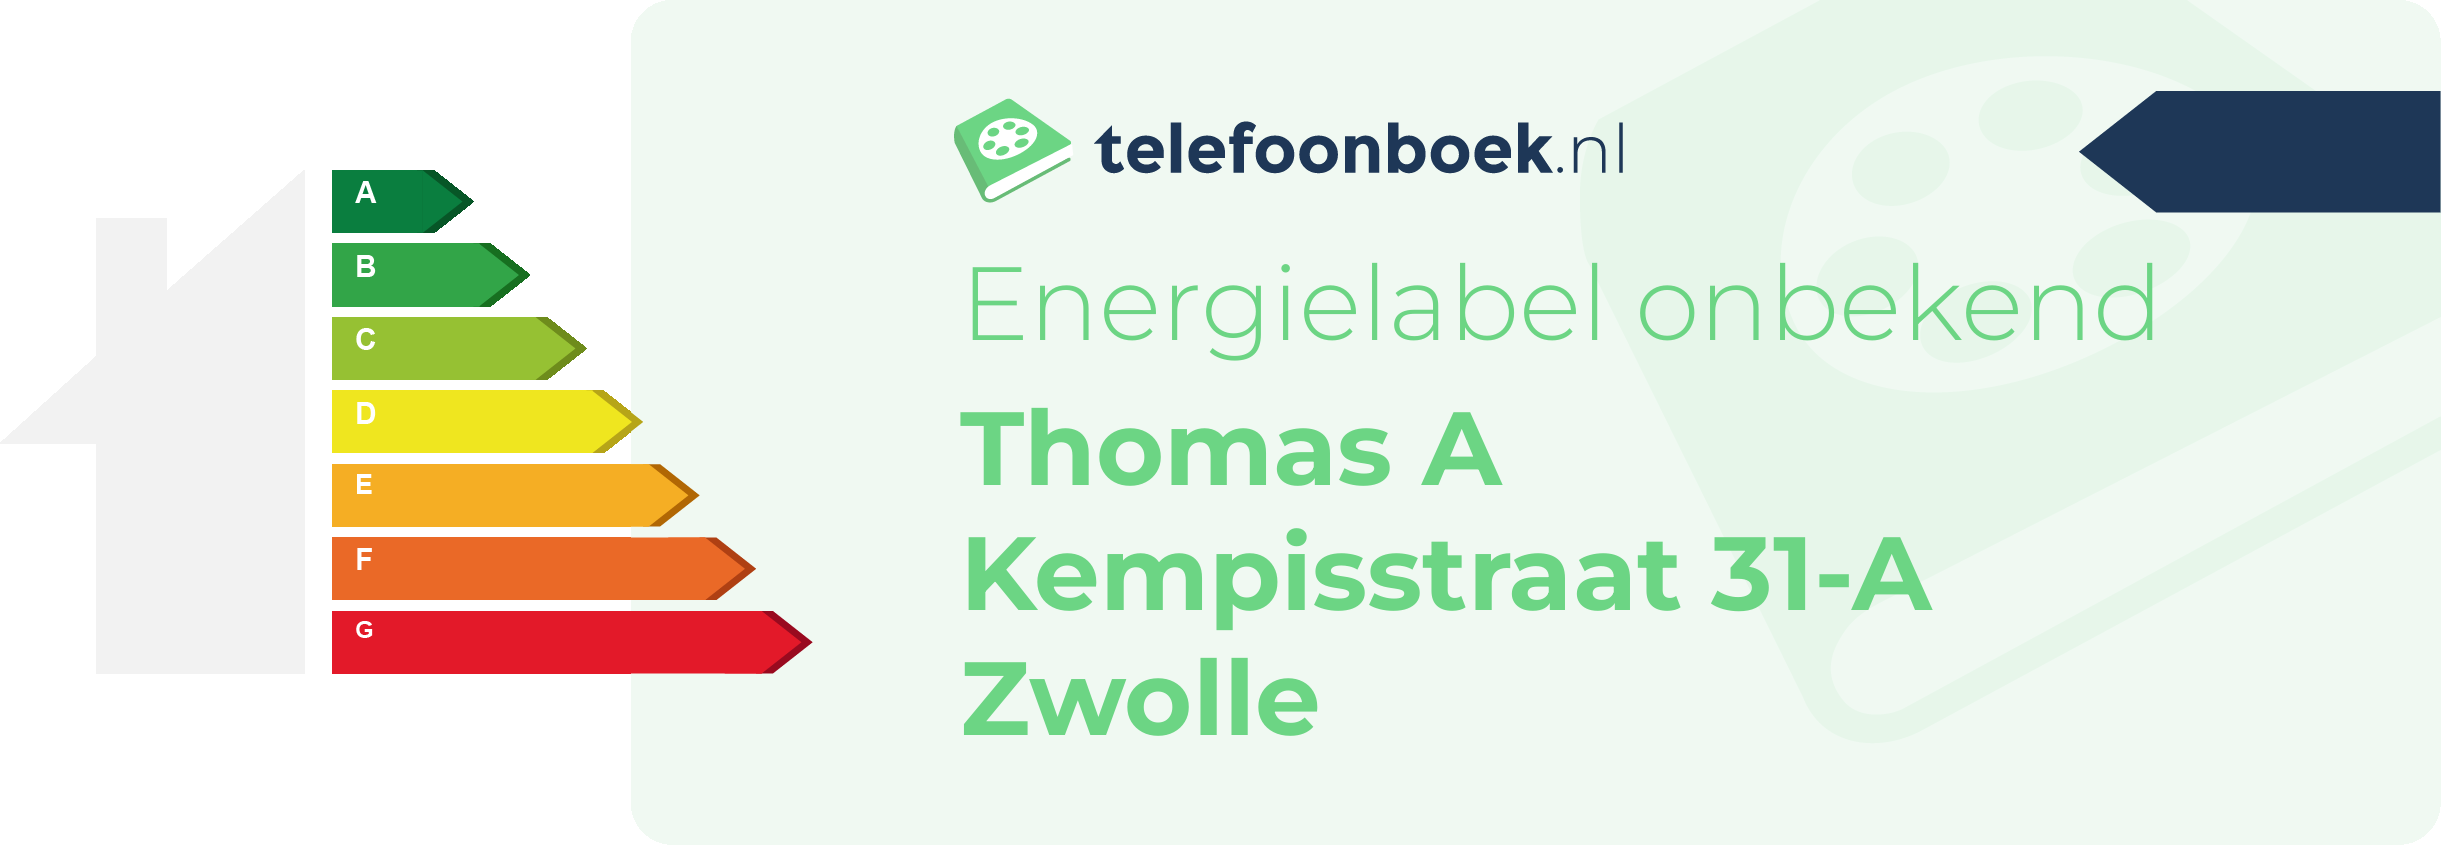 Energielabel Thomas A Kempisstraat 31-A Zwolle